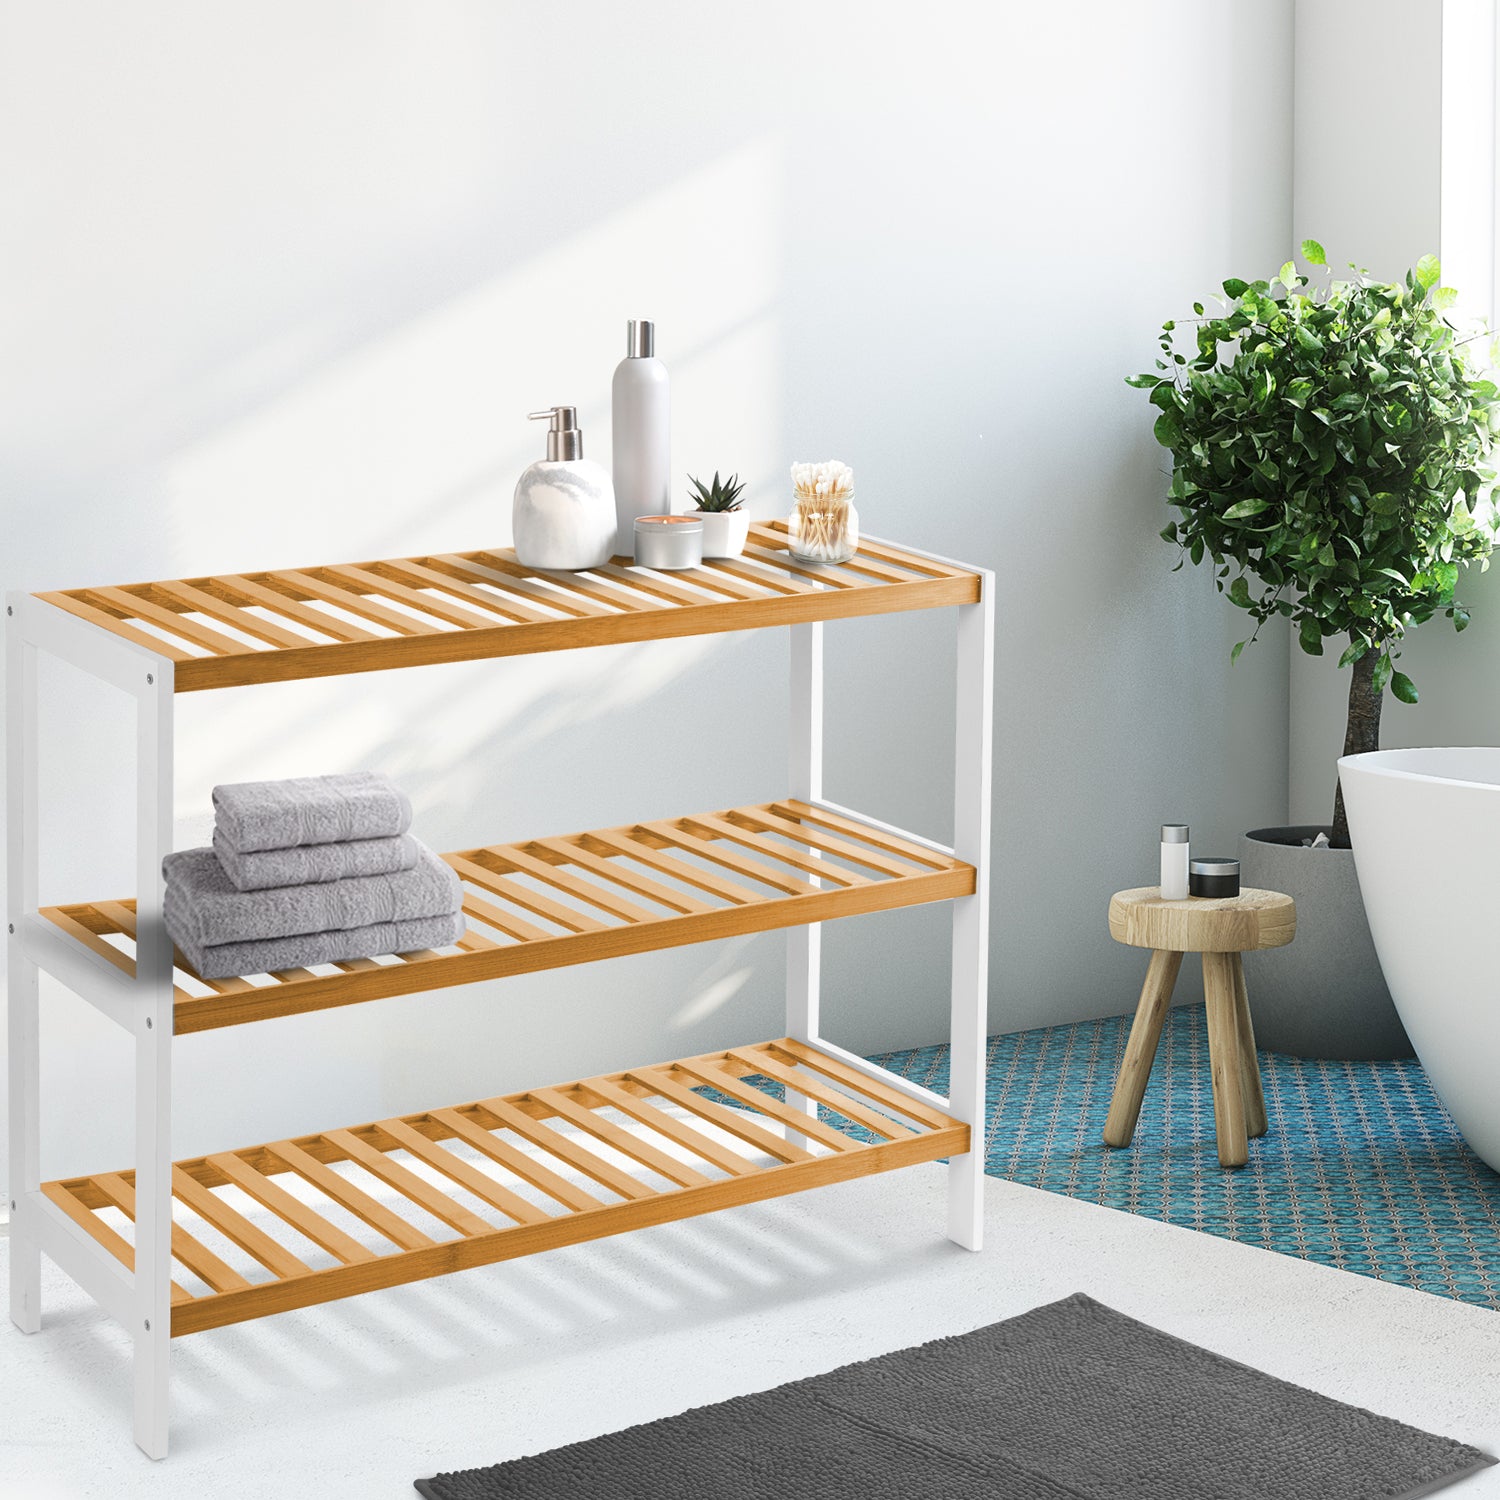 3-Tier Bamboo Shoe Rack - Wooden Shoe Organiser with Large Storage Capacity